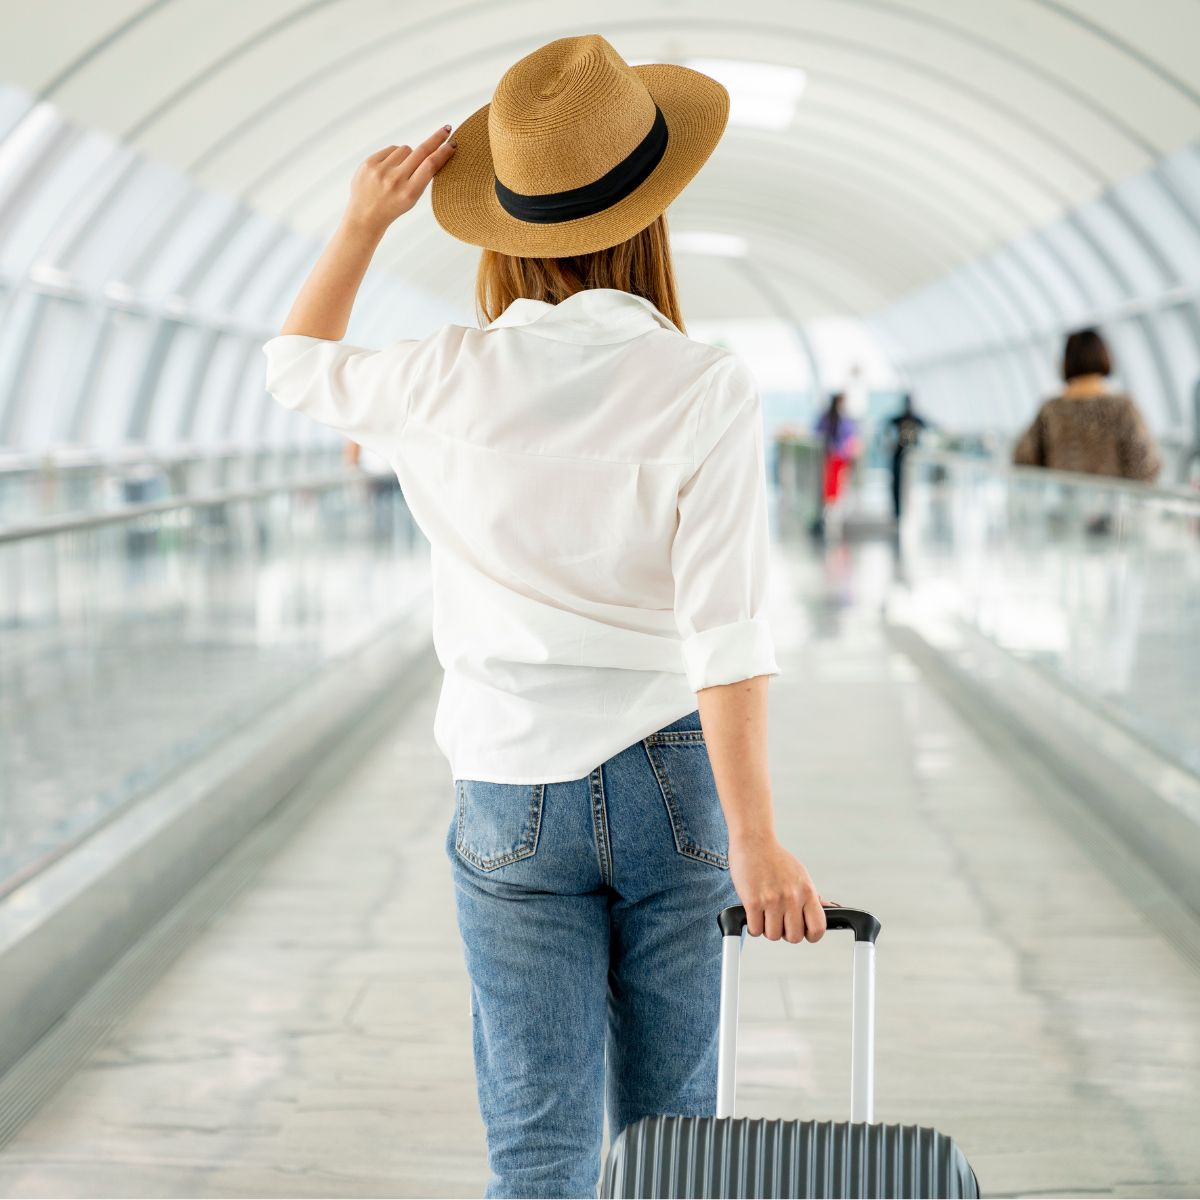 27 Things to Pack if You’re Traveling…